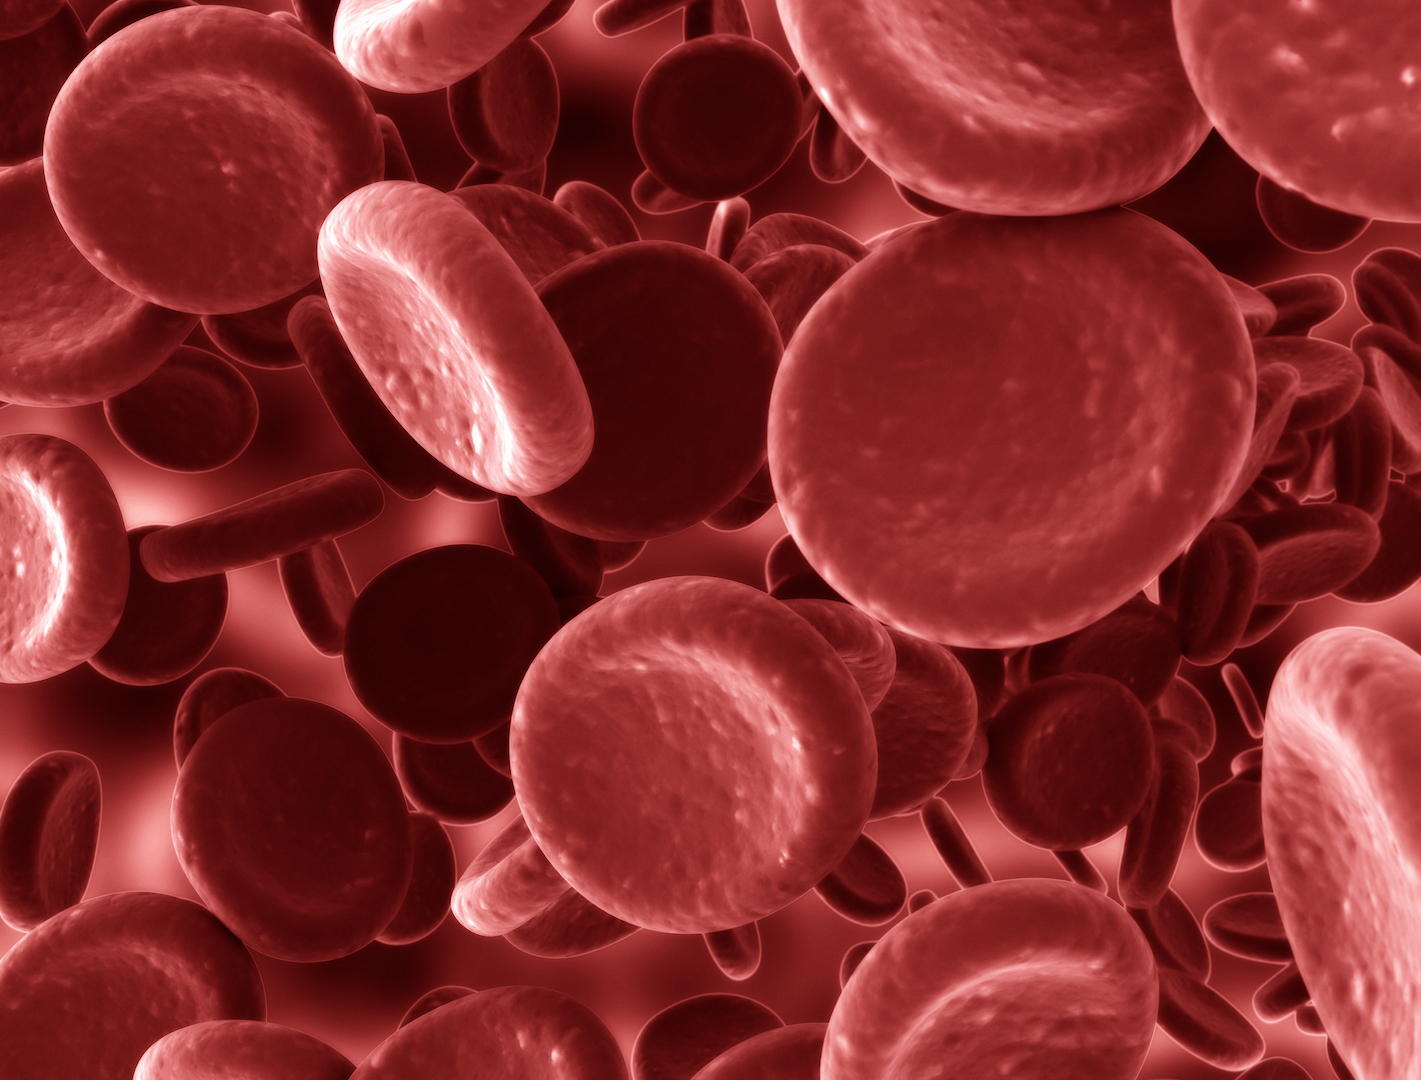 WHAT IS ANEMIA? SYMPTOMS AND TREATMENT OPTIONS.